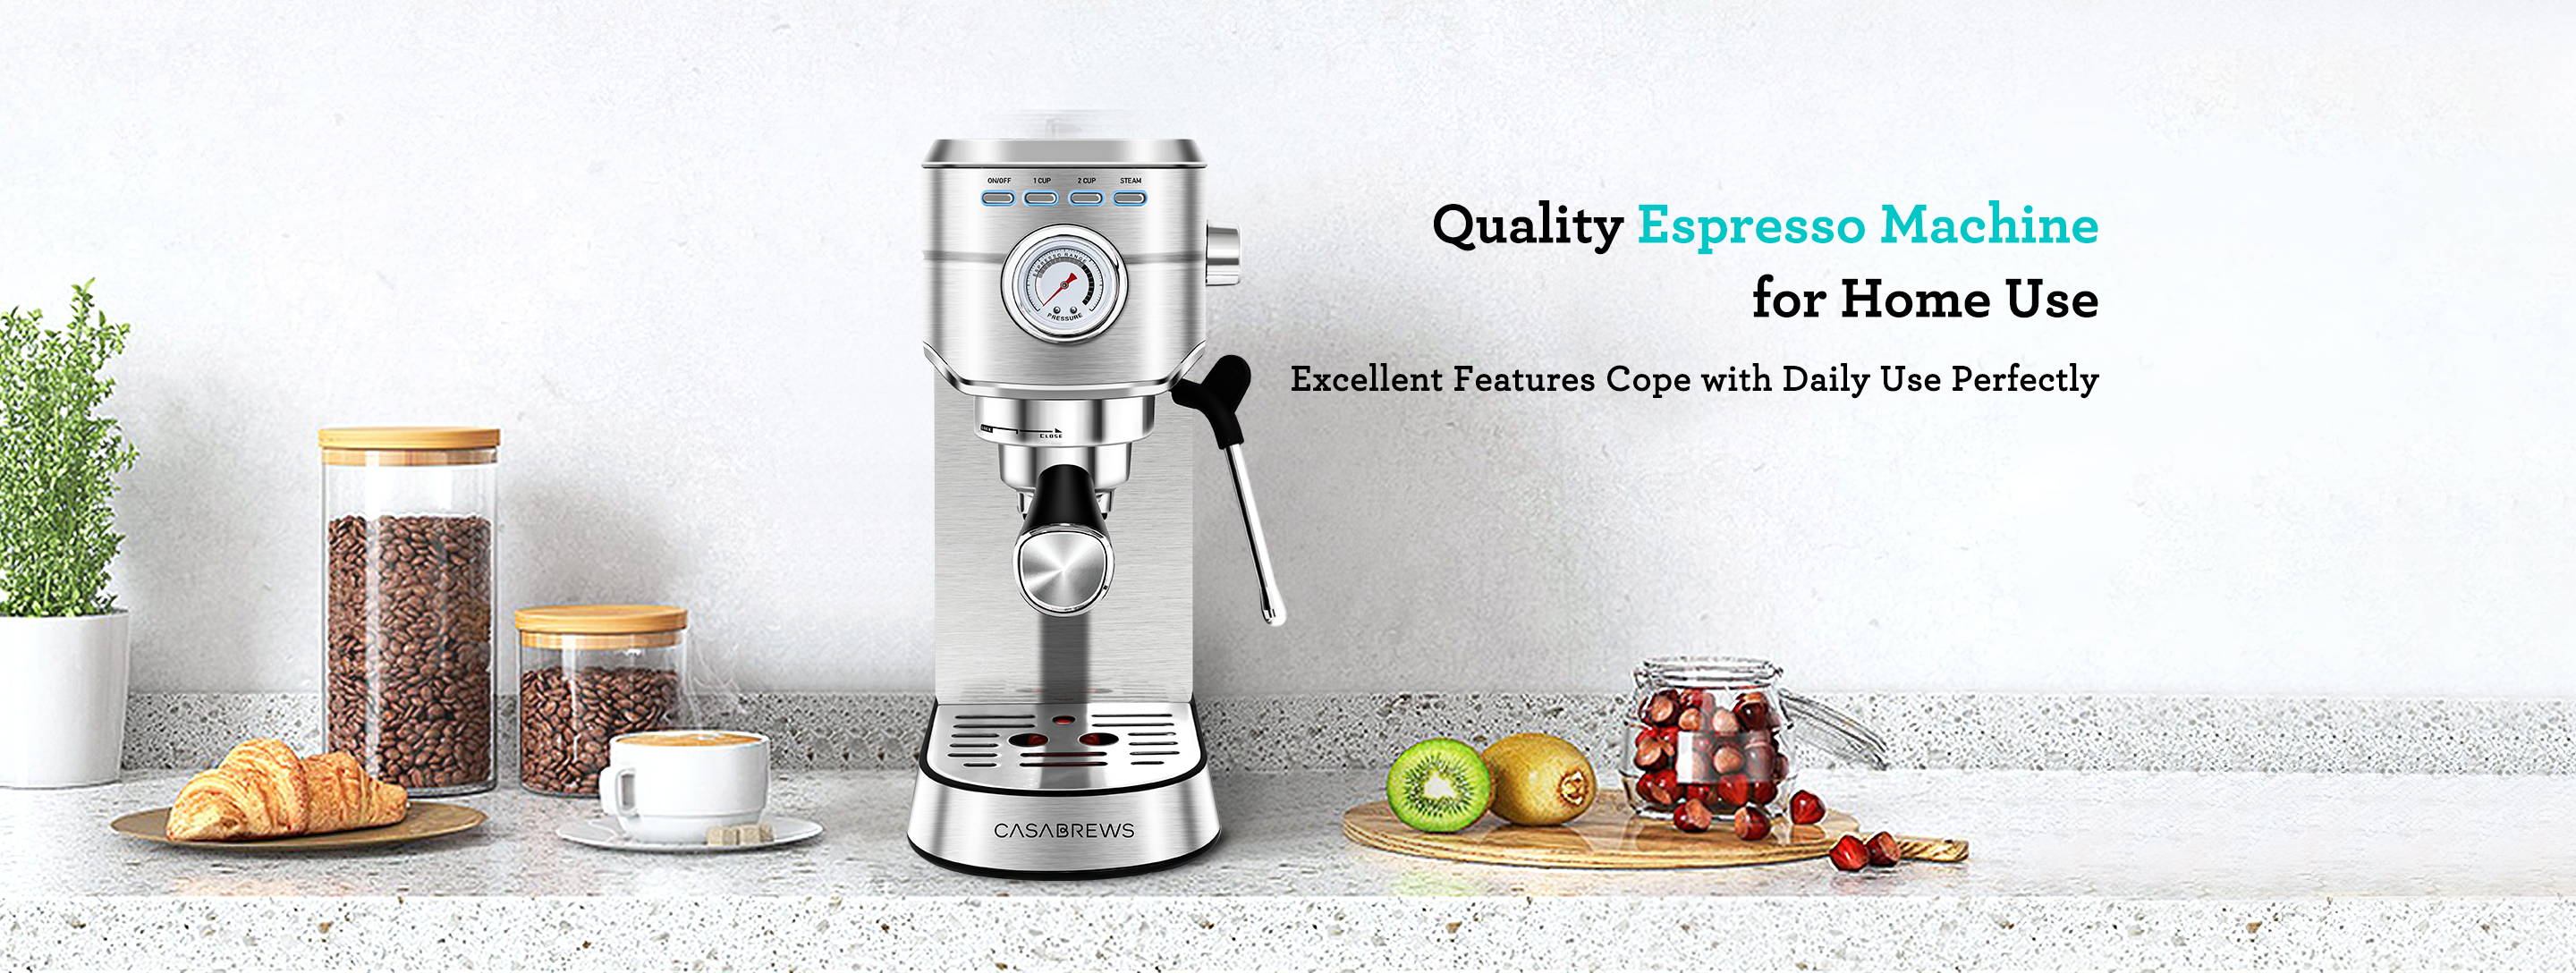 Quality Espresso Machine for Home Use Excellent Features Cope with Daily Use Perfectly.